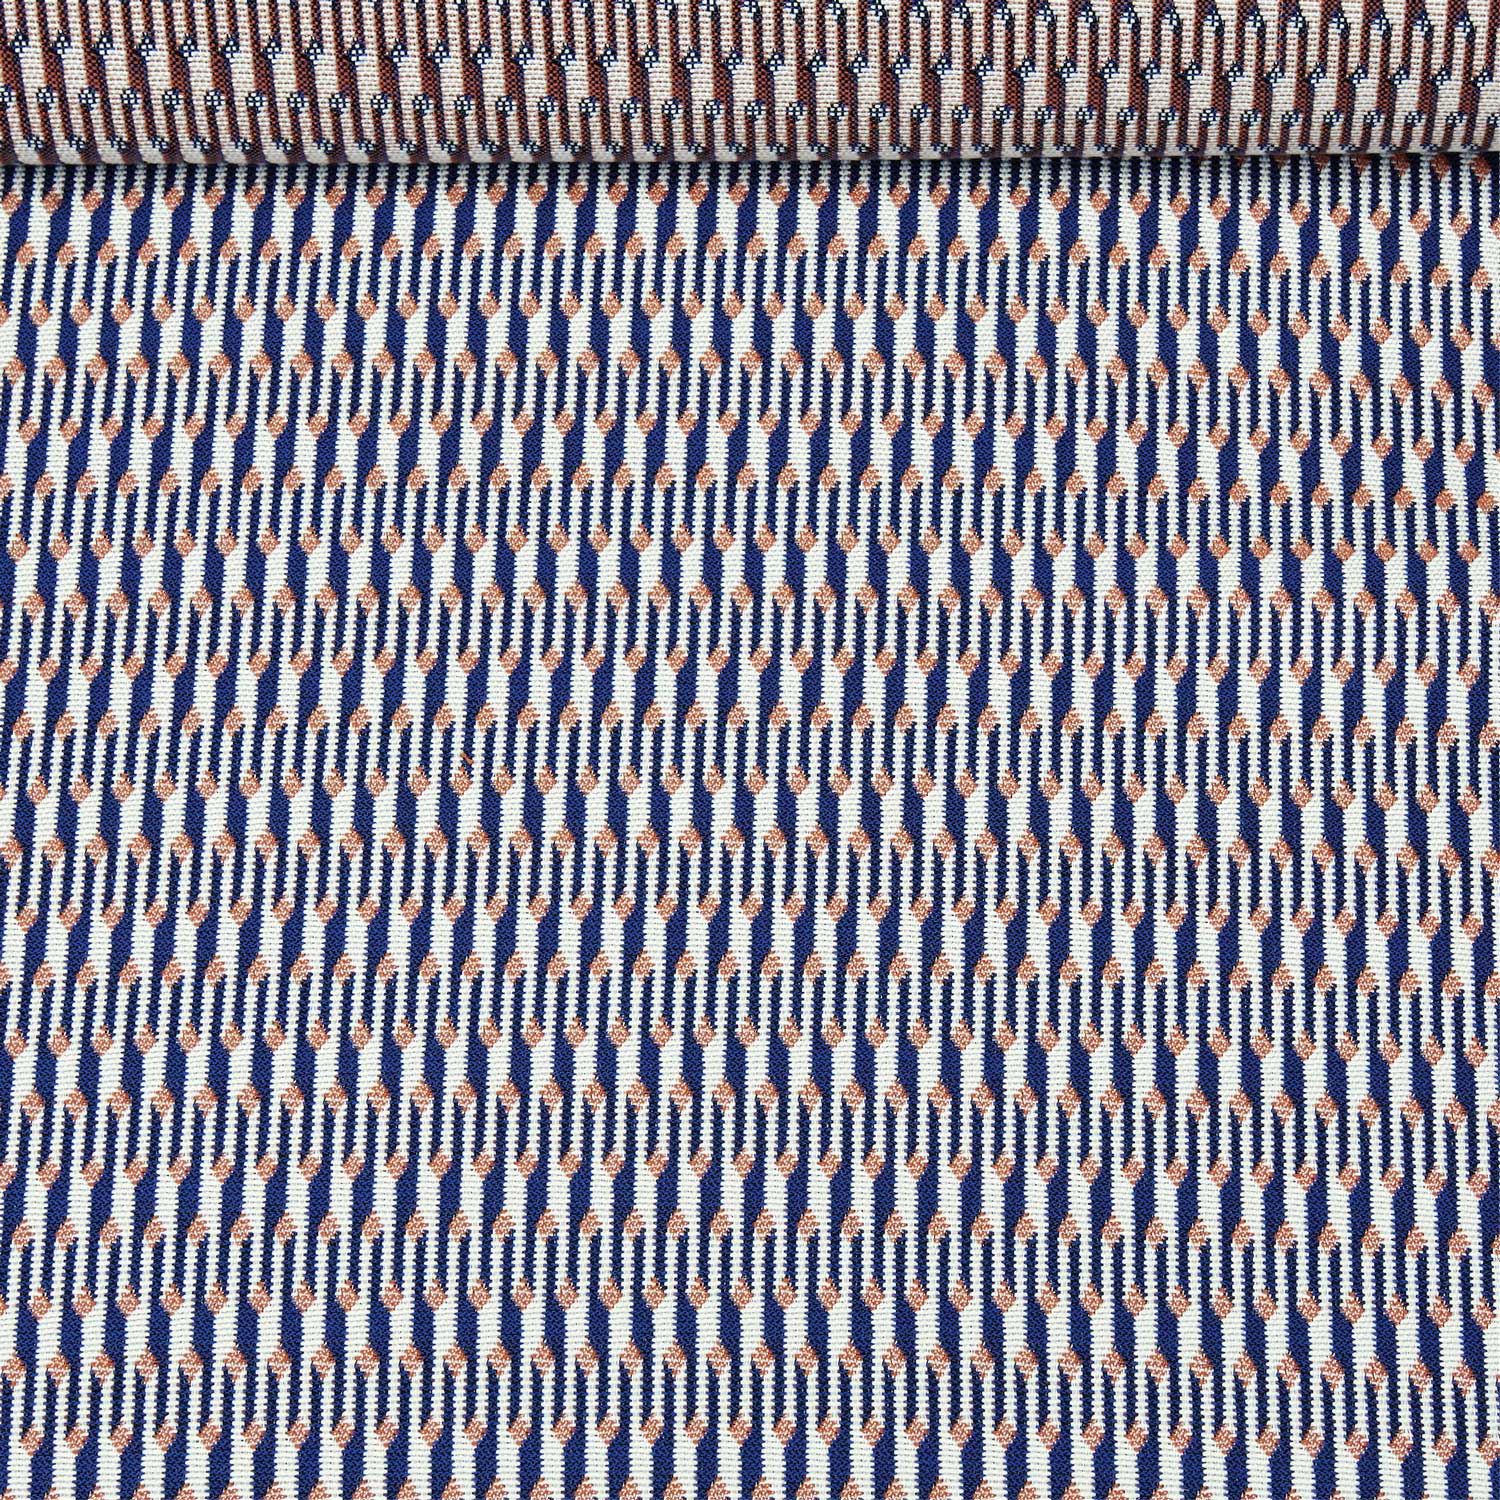 A birds eye view of a jacquard woven blue, white and orange pattern outdoor performance fabric roll. 